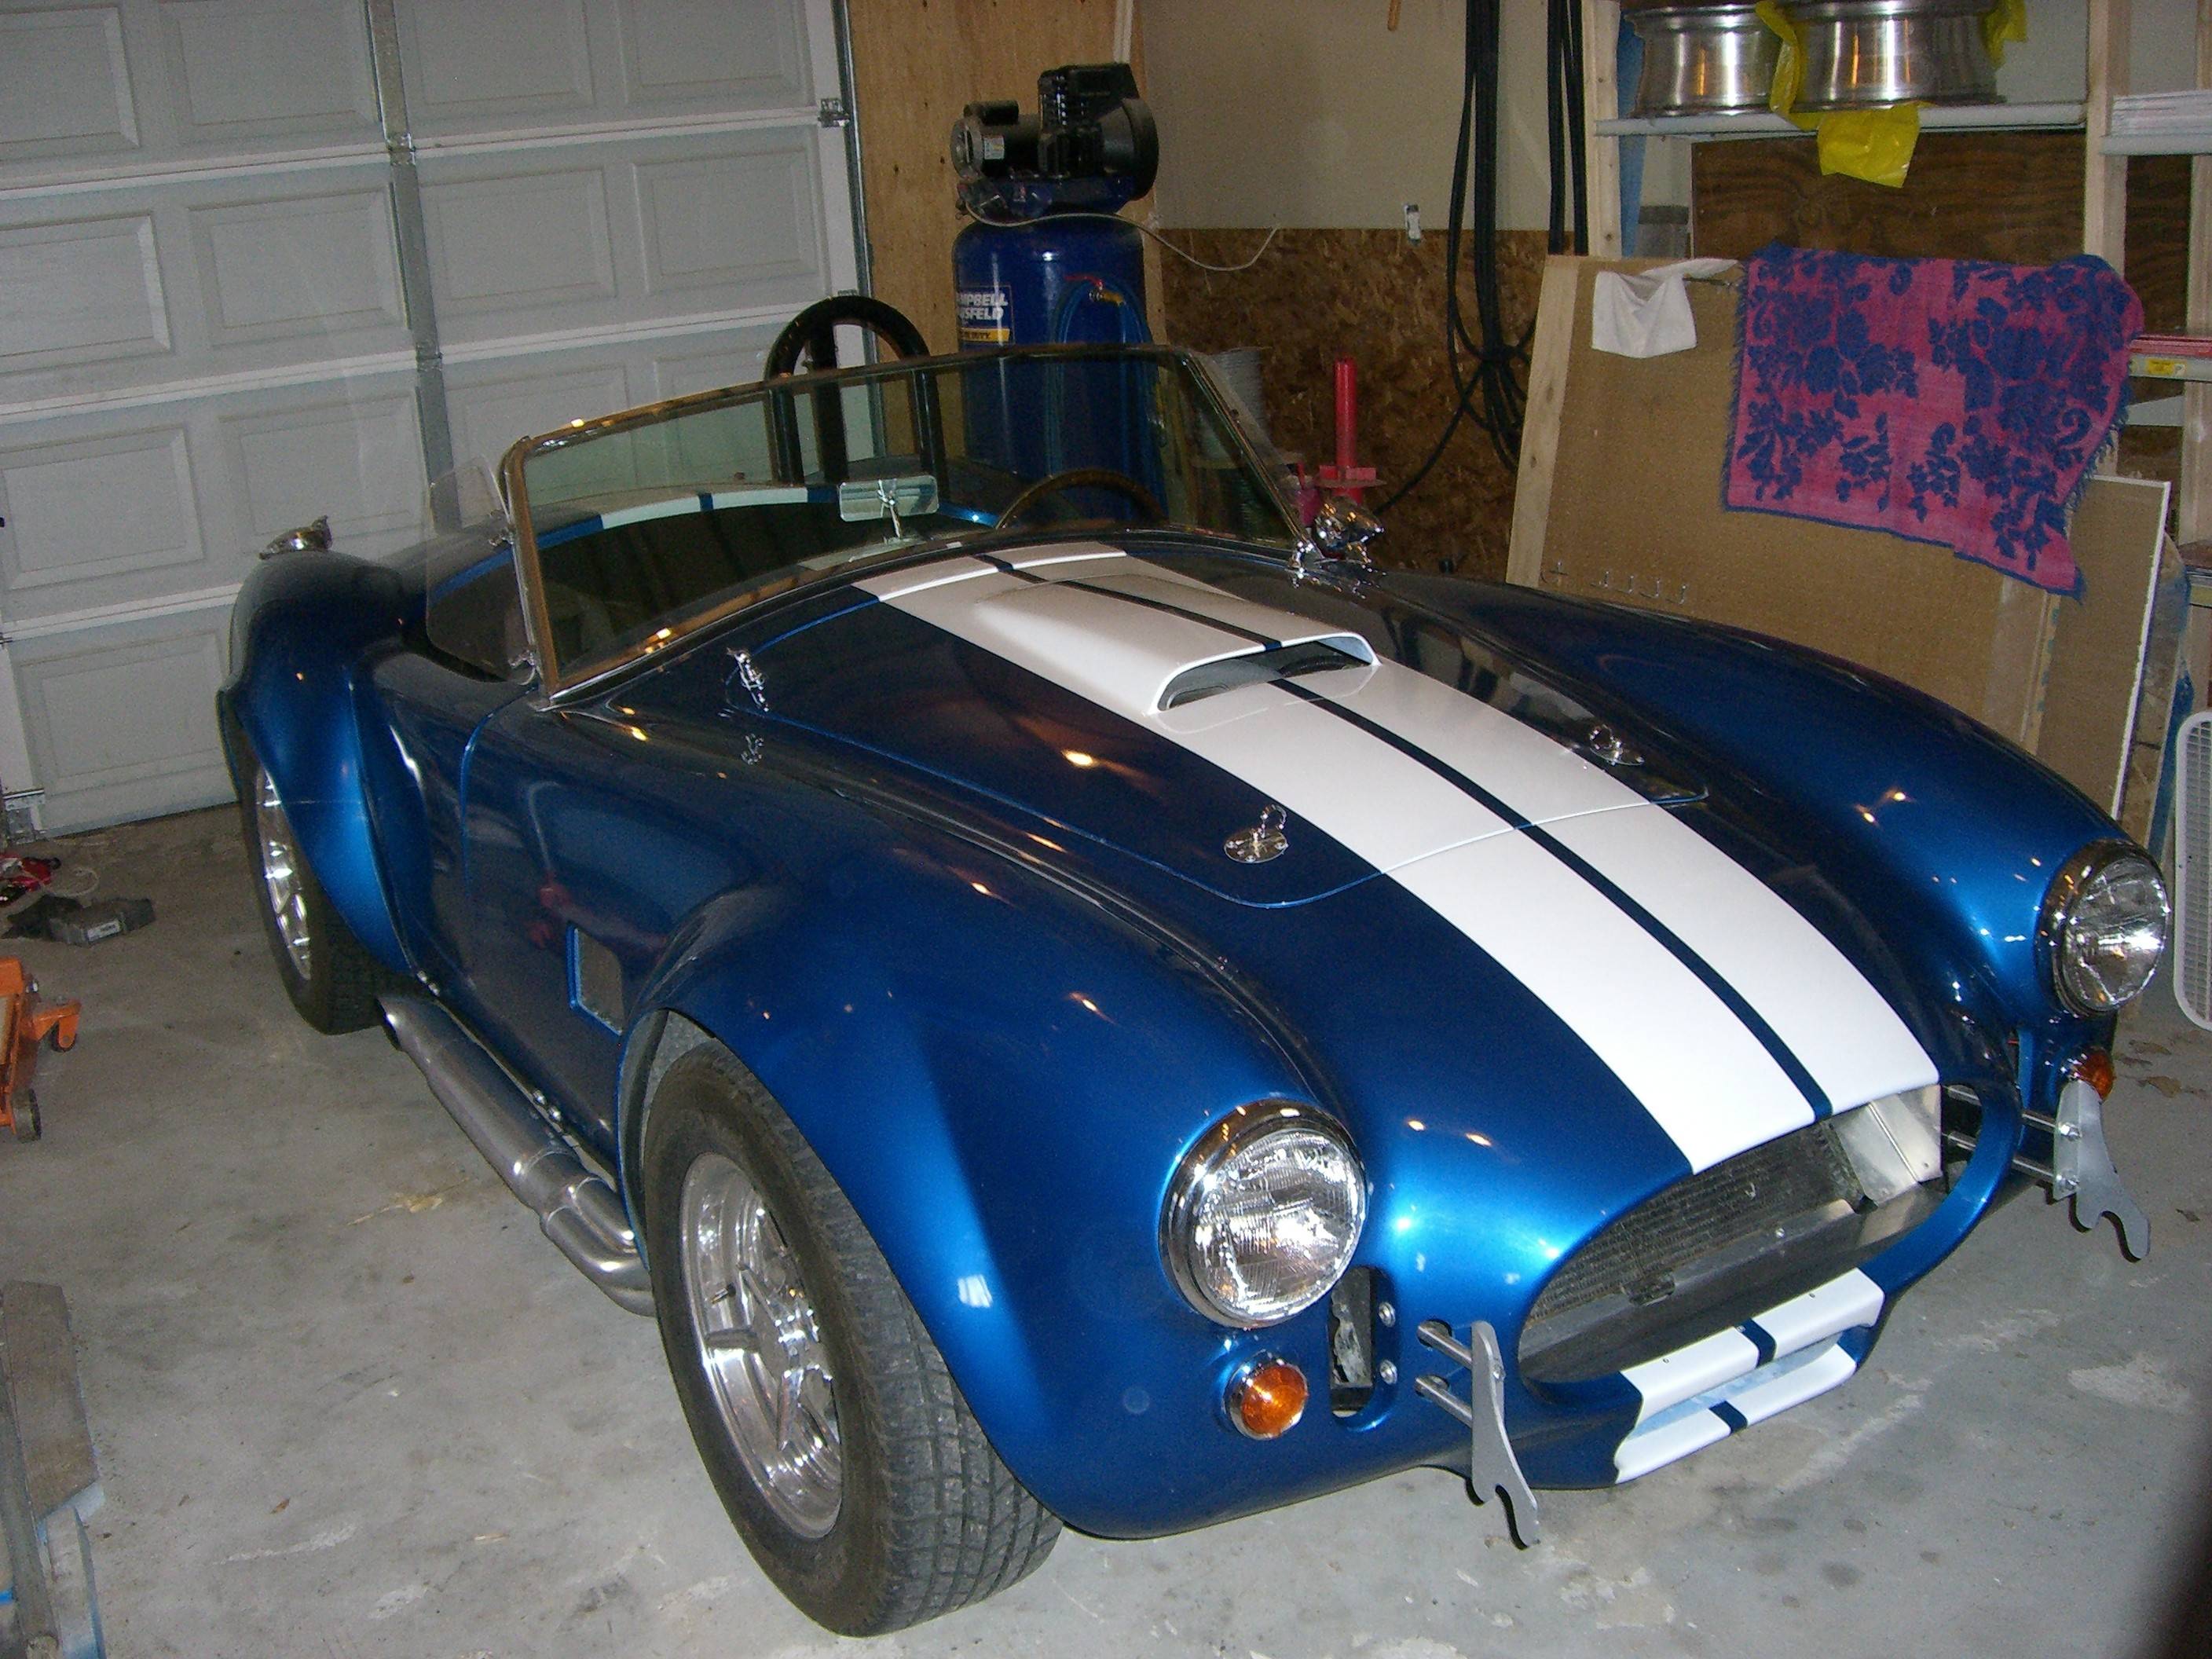 2007 replica of AC Cobra 427 Roadster, with Ford 5.0L HO engine